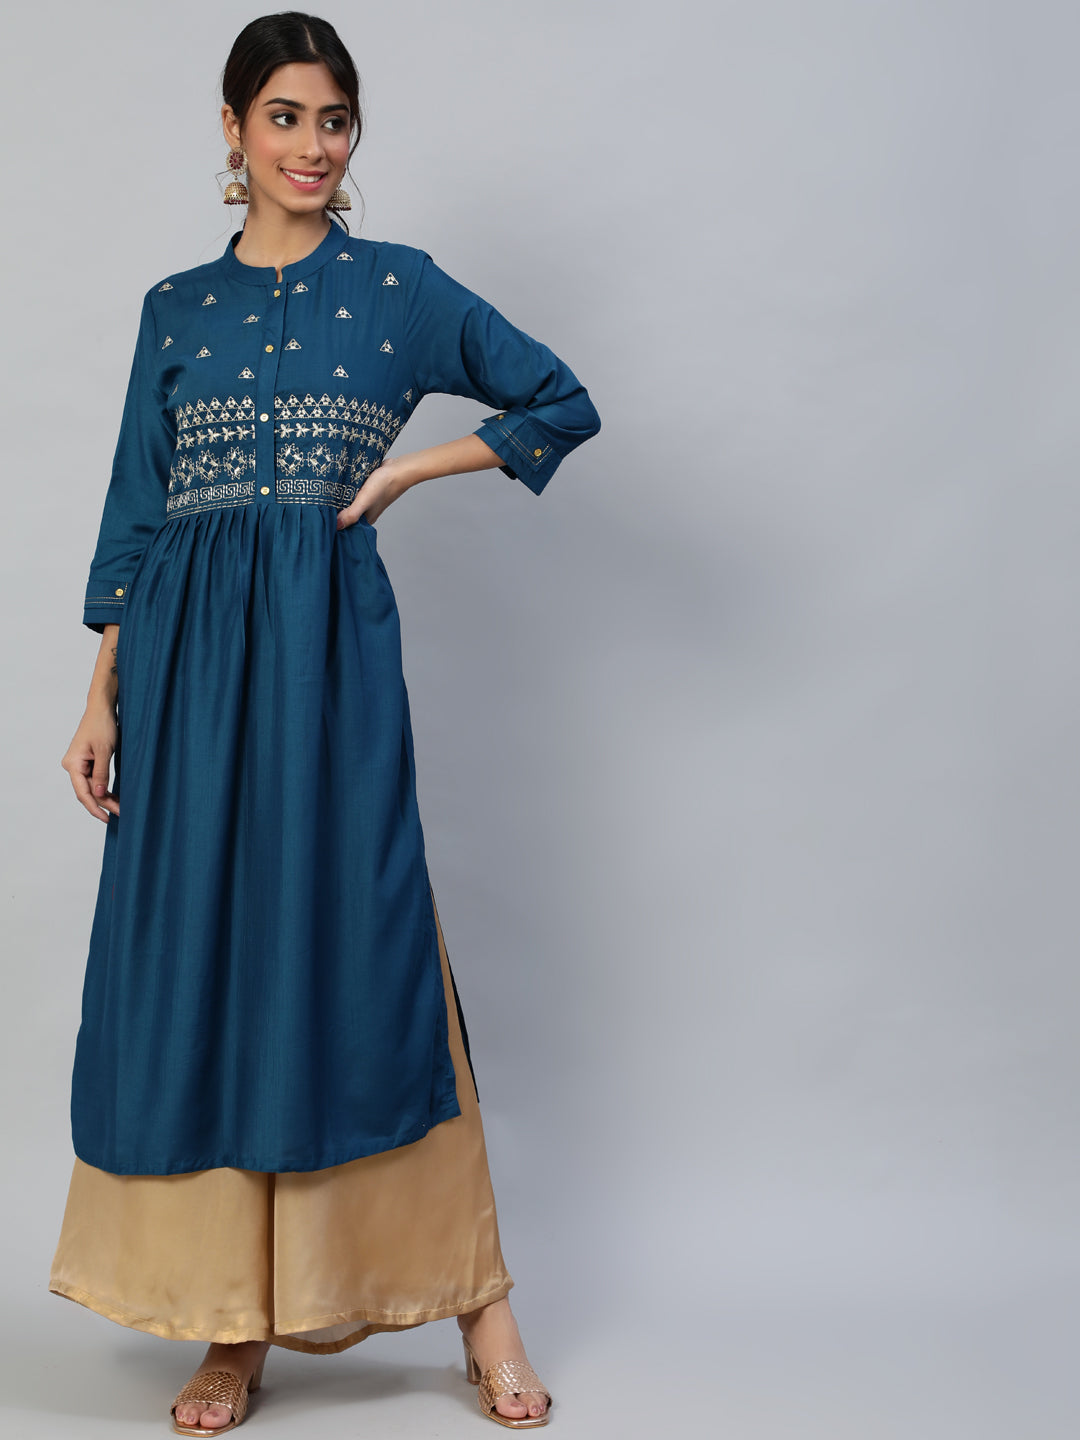 Women's Teal Ethnic Motifs Embroidered Flared Sleeves Kurta